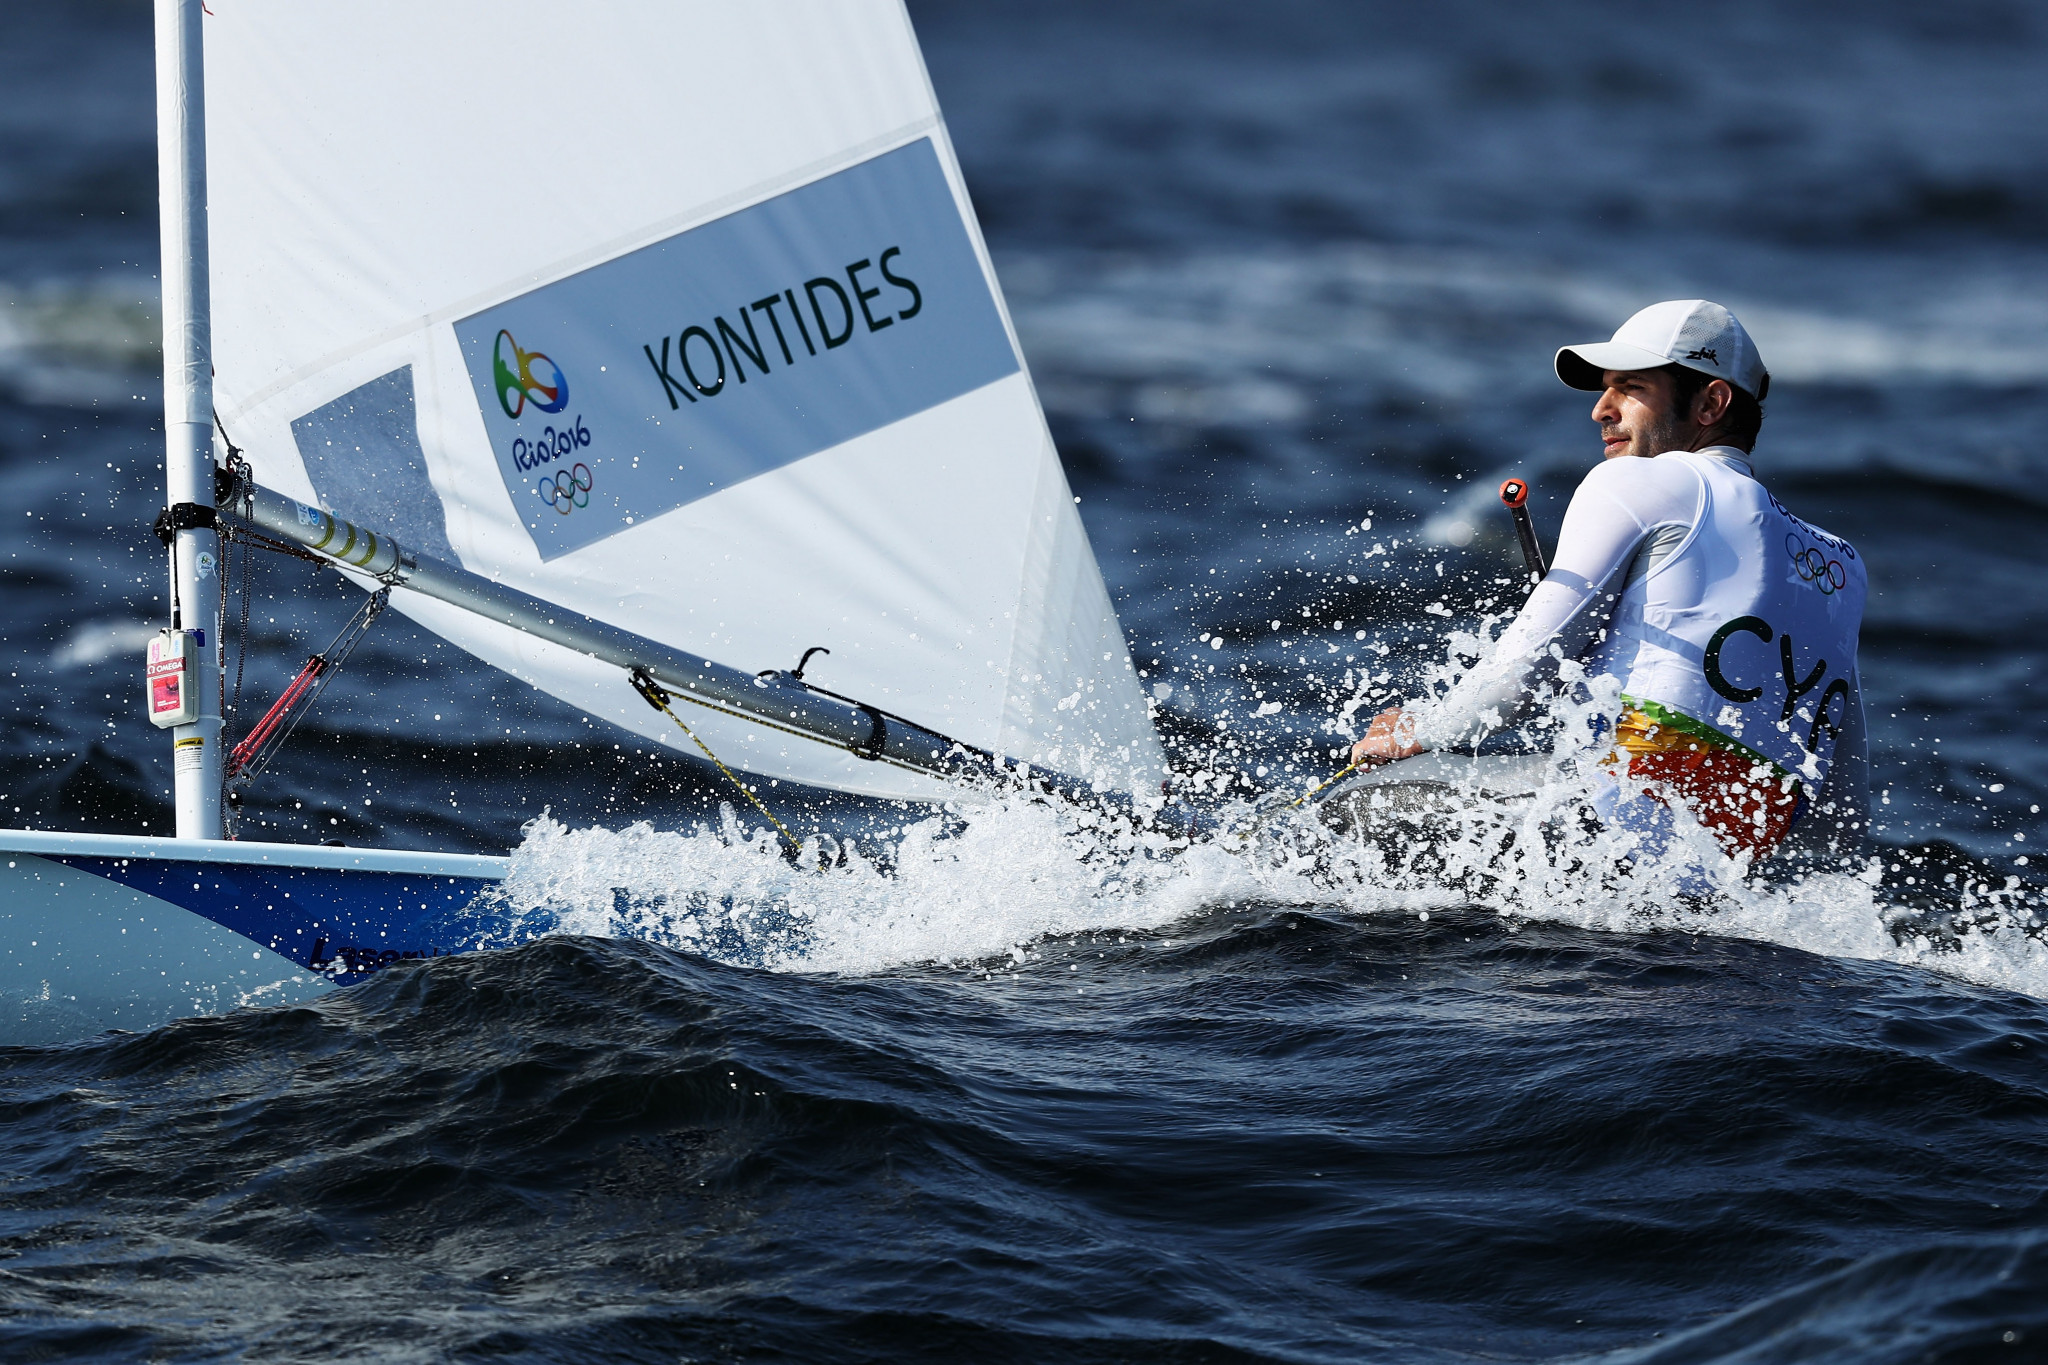 Pavlos Kontides of Cyprus won the men's World Sailor of the Year prize in 2018 ©Getty Images